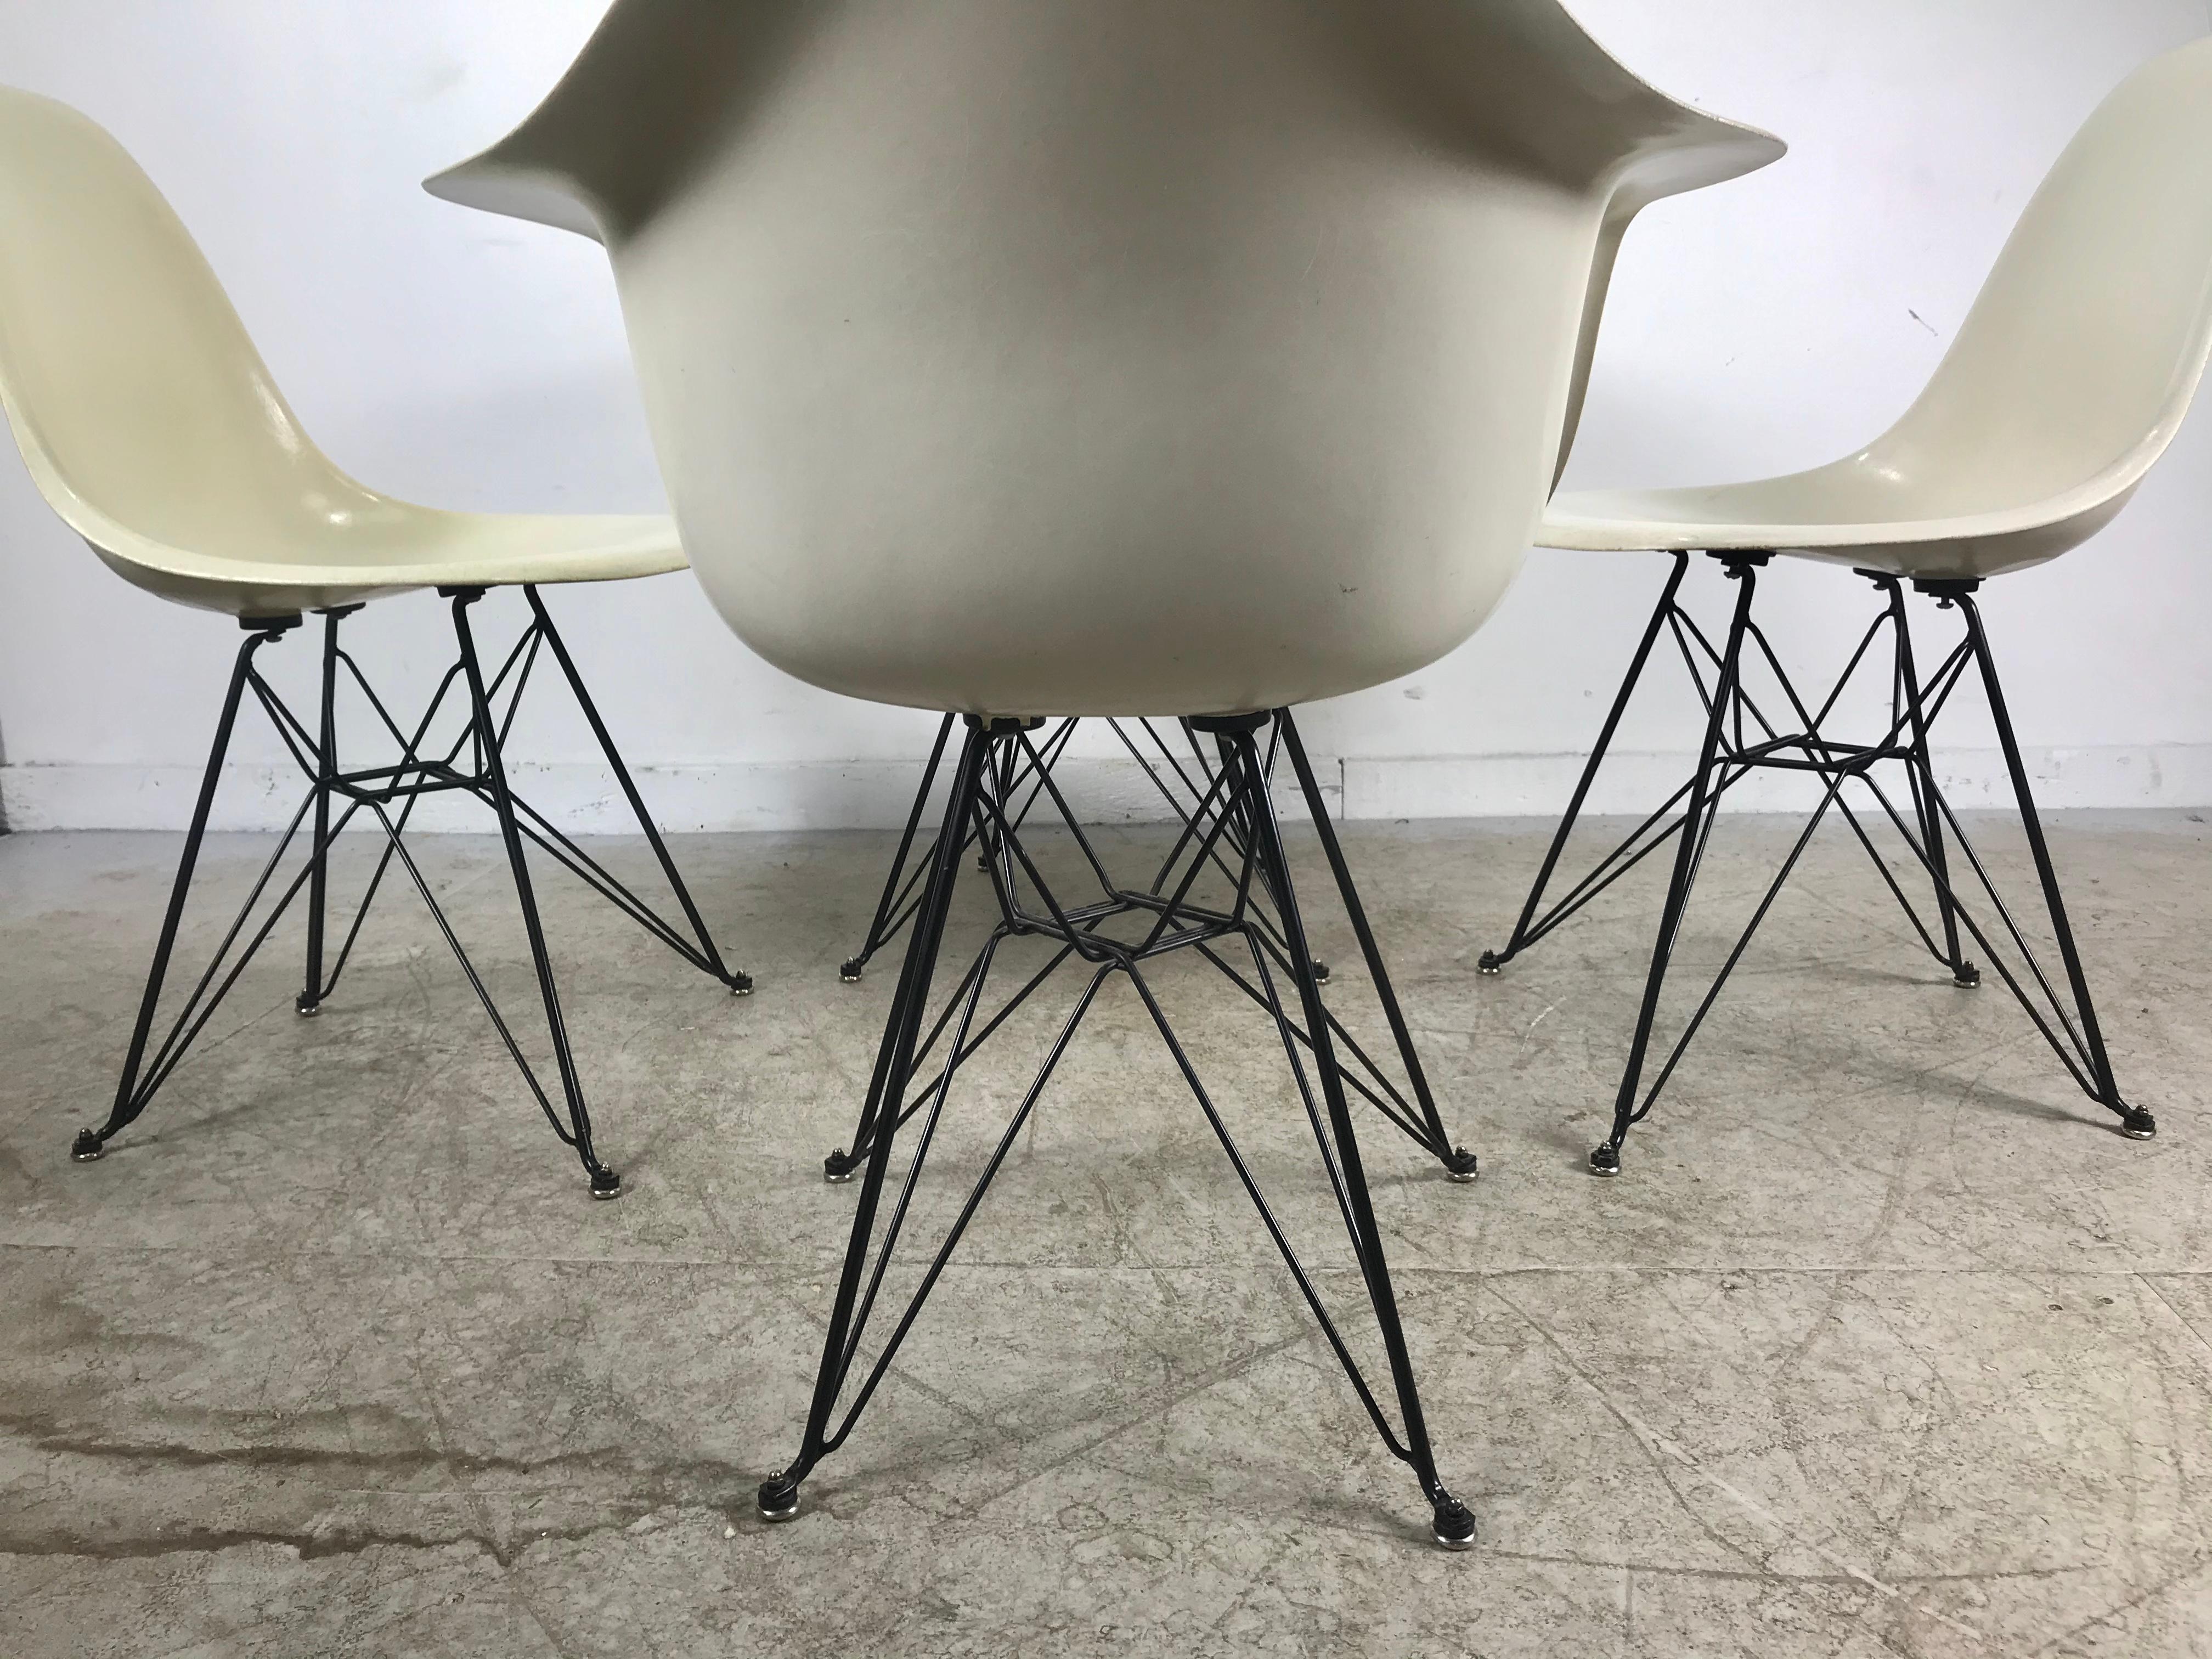 Set 4 Charles Eames, Herman Miller fiberglass chairs, elegant white, Newer Eiffel Tower bases, approximately 20 years old, great set 4 consisting of two vintage arm shell chairs and two vintage side shell chairs (scoops), embossed Herman Miller, my